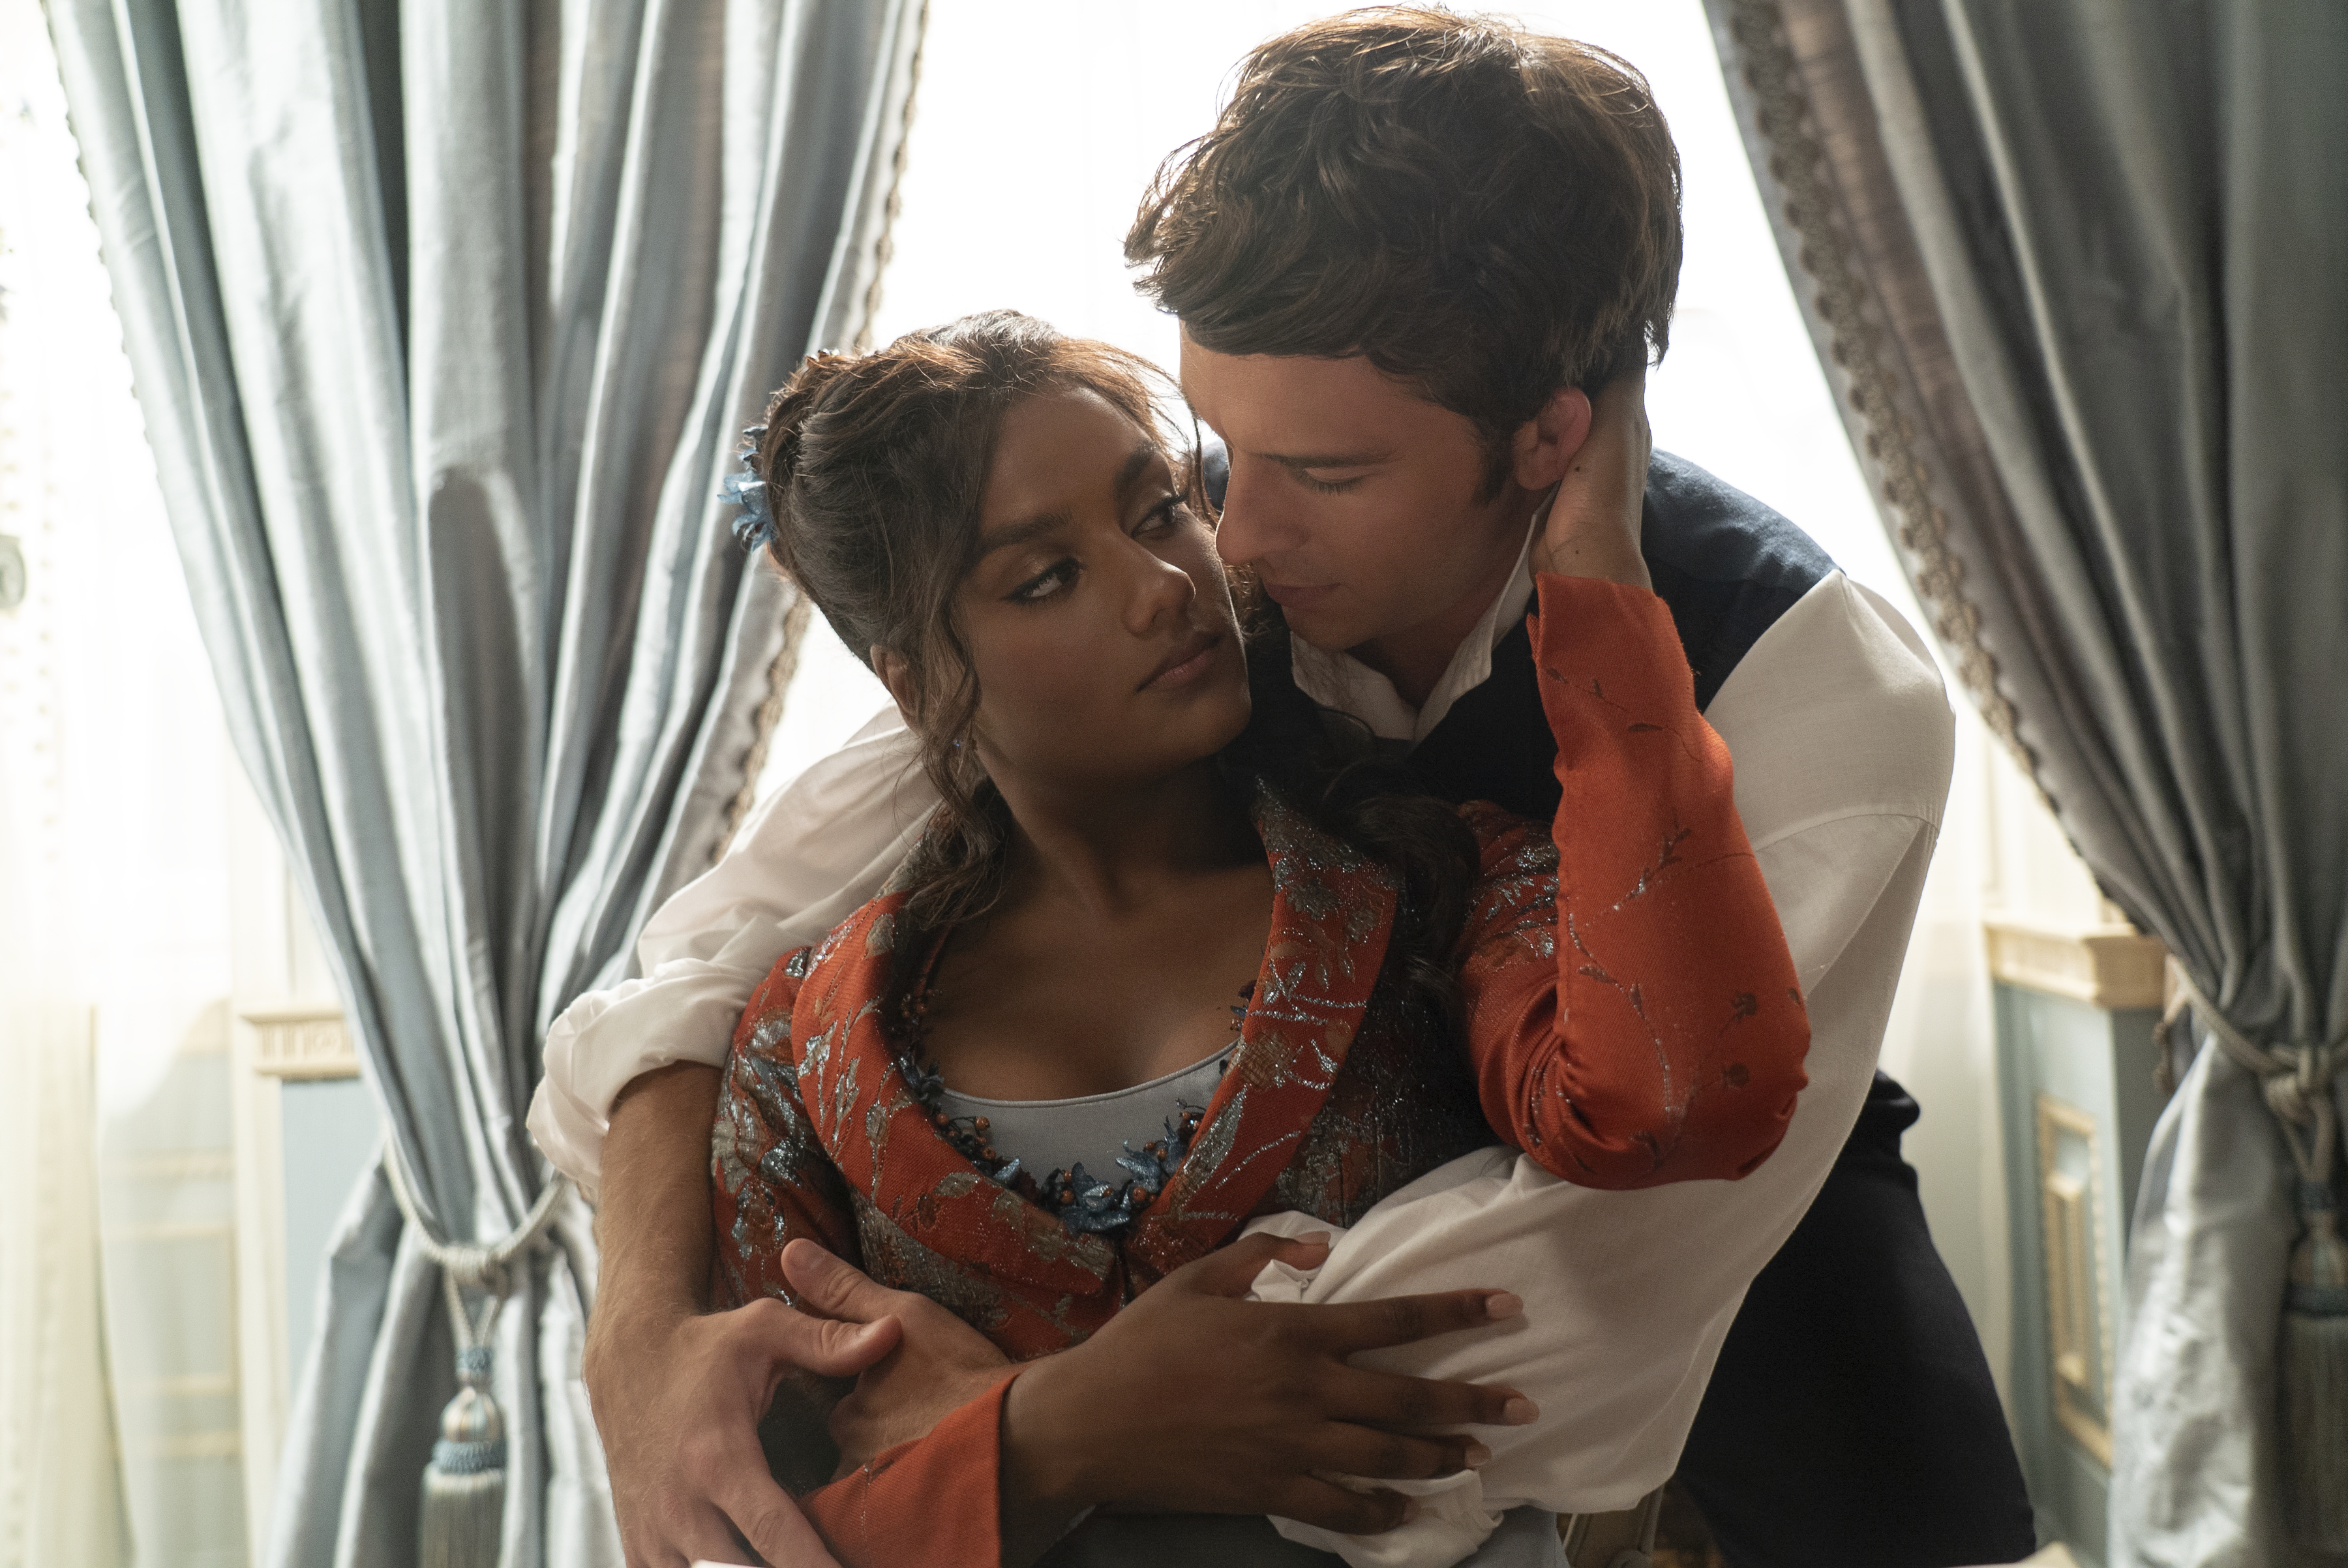 <p>Simone Ashley plays Kate Sharma -- the new Viscountess Bridgerton -- and Jonathan Bailey plays Viscount Anthony Bridgerton in episode 1, season 3 of "Bridgerton," which debuts on Netflix on May 16, 2024.</p><p>"It's going to be tantalizing," Jonathan told E! News of the show's third season, assuring fans, "It's going to be good. And also, my brother Luke Newton is bringing the heat with Nicola [as Colin and Penelope, the new leads]. So it's going to be great."</p><p>Simone also spoke to E! News, sharing that season 3's episodes will "get super steamy" and that fans can expect "condensation central."</p><p>MORE: <a href="https://www.wonderwall.com/celebrity/things-to-know-about-bridgerton-hunk-jonathan-bailey-fun-facts-574274.gallery">Everything you might not know (but should!) about "Bridgerton" star Jonathan Bailey</a></p>